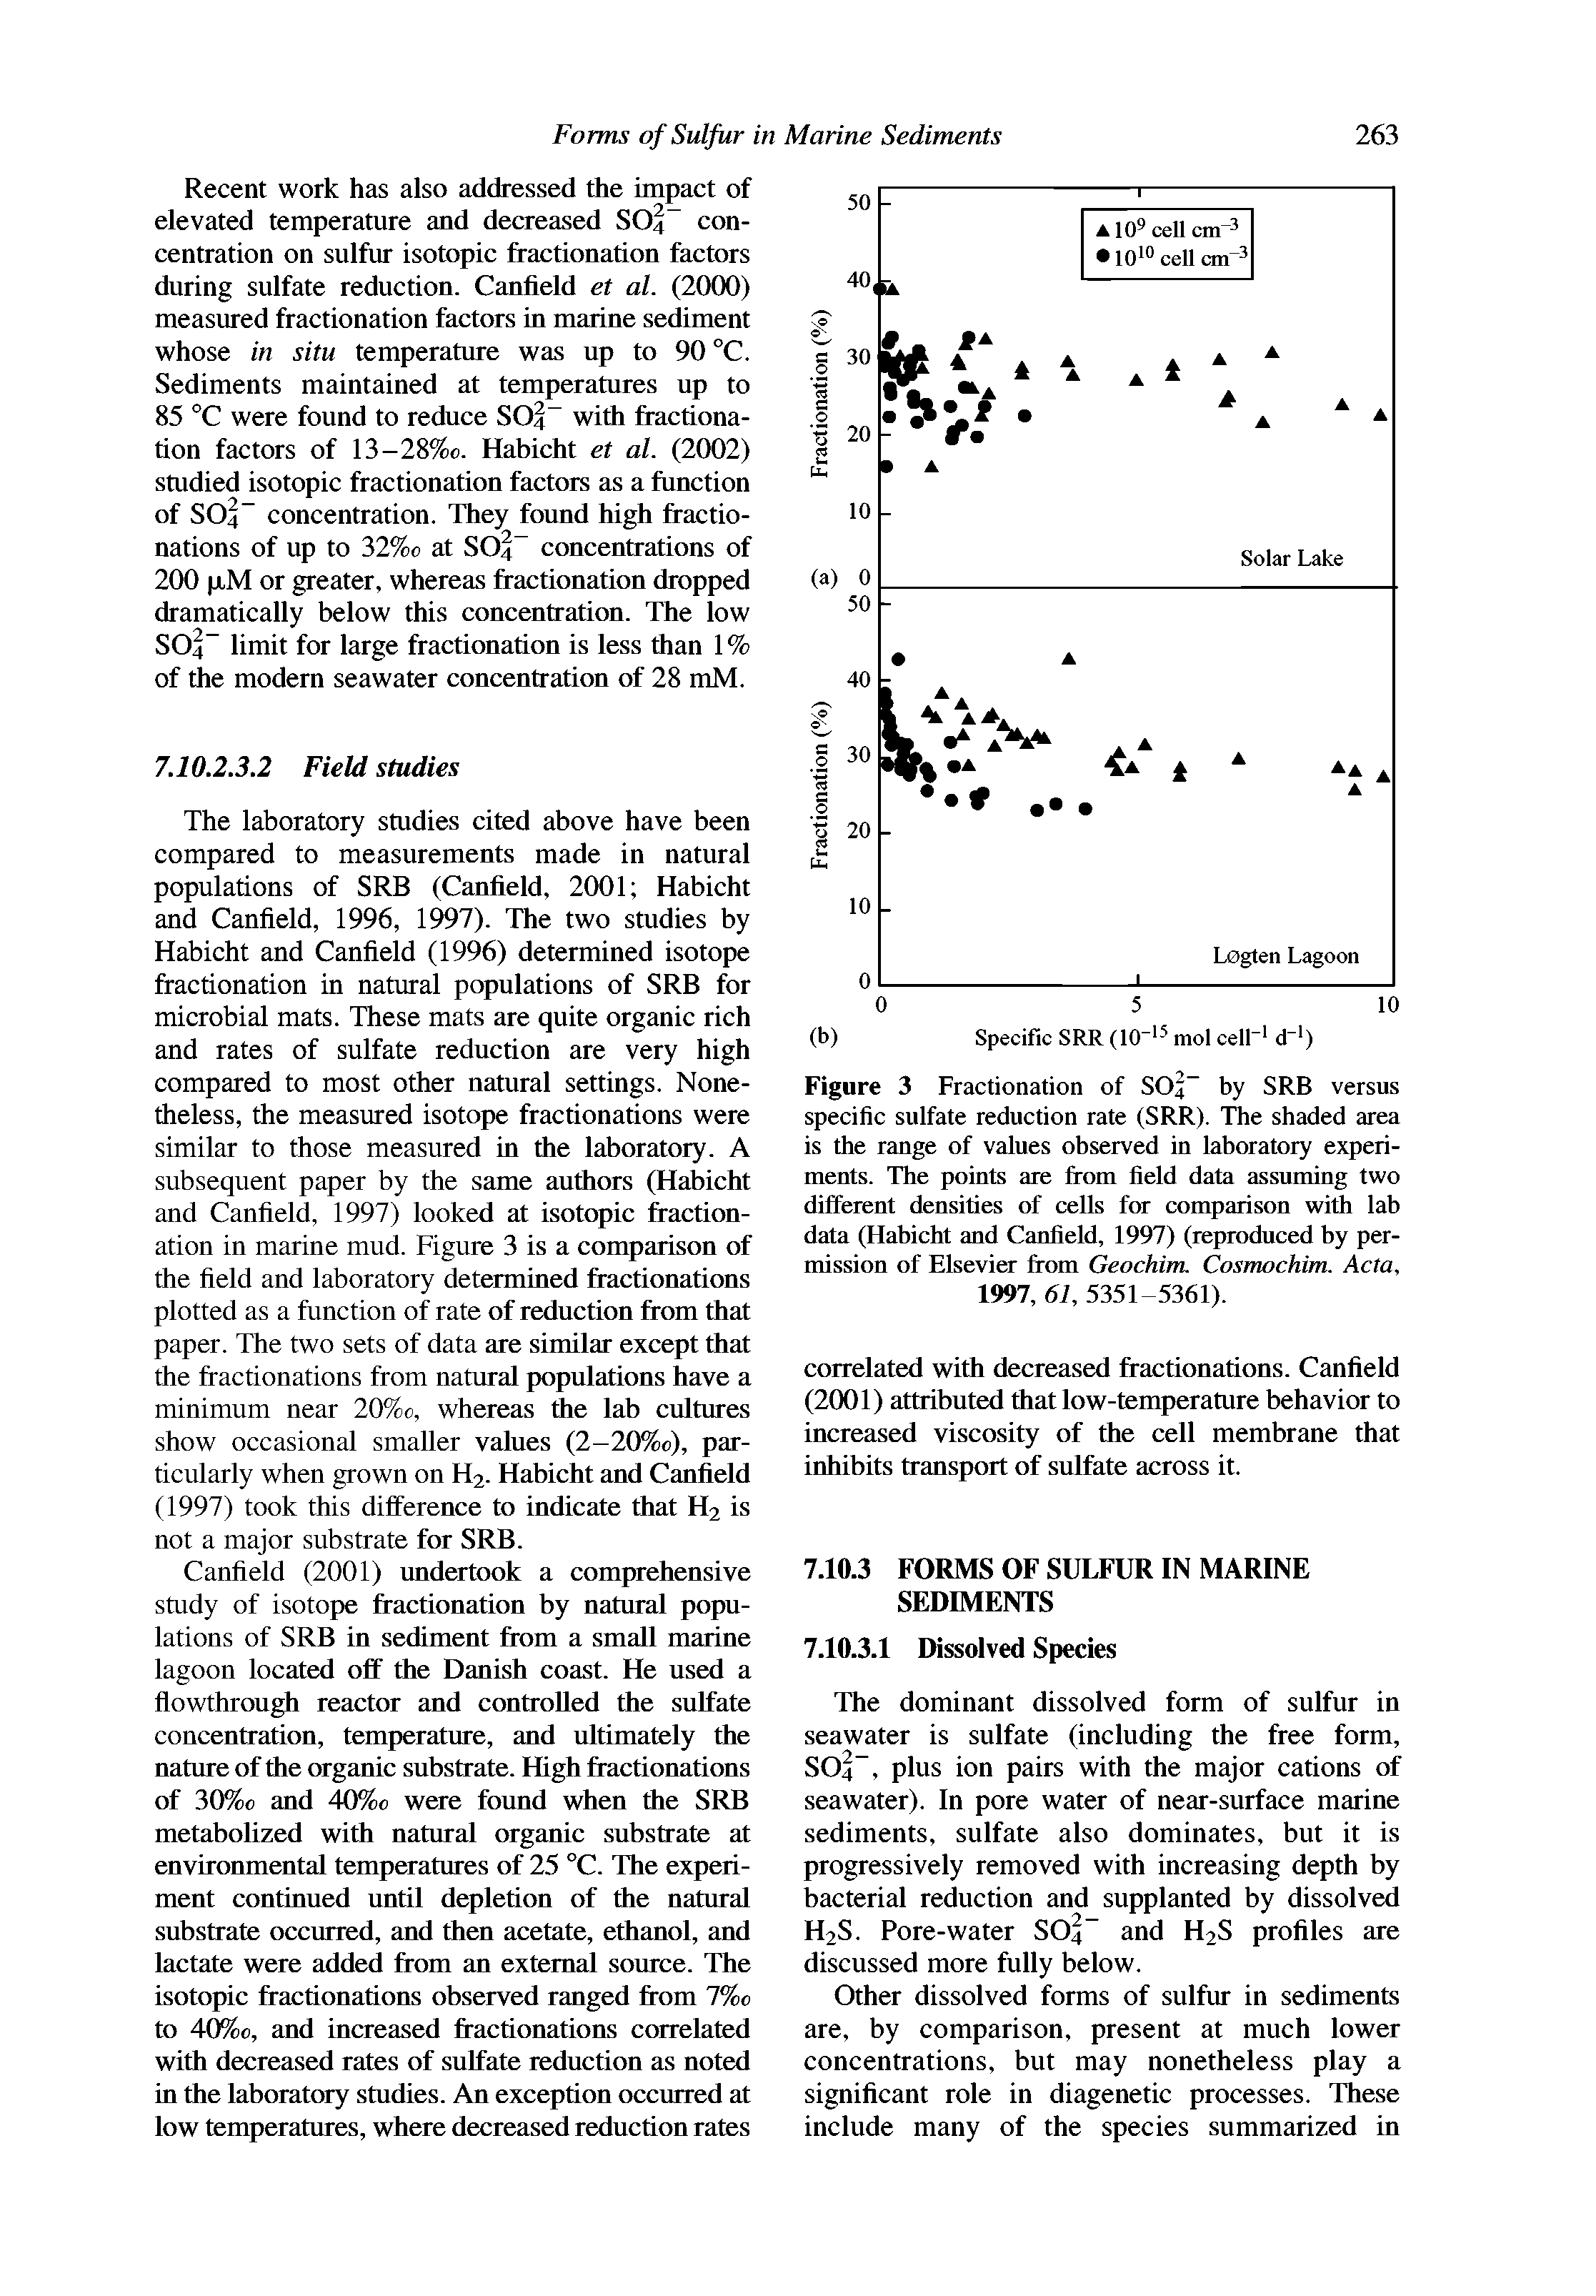 Figure 3 Fractionation of SO4 by SRB versus specific sulfate reduction rate (SRR). The shaded area is the range of values observed in laboratory experiments. The points are from field data assuming two different densities of cells for comparison with lab data (Habicht and Canfield, 1997) (reproduced by permission of Elsevier from Geochim. Cosmochim. Acta, 1997, 61, 5351-5361).